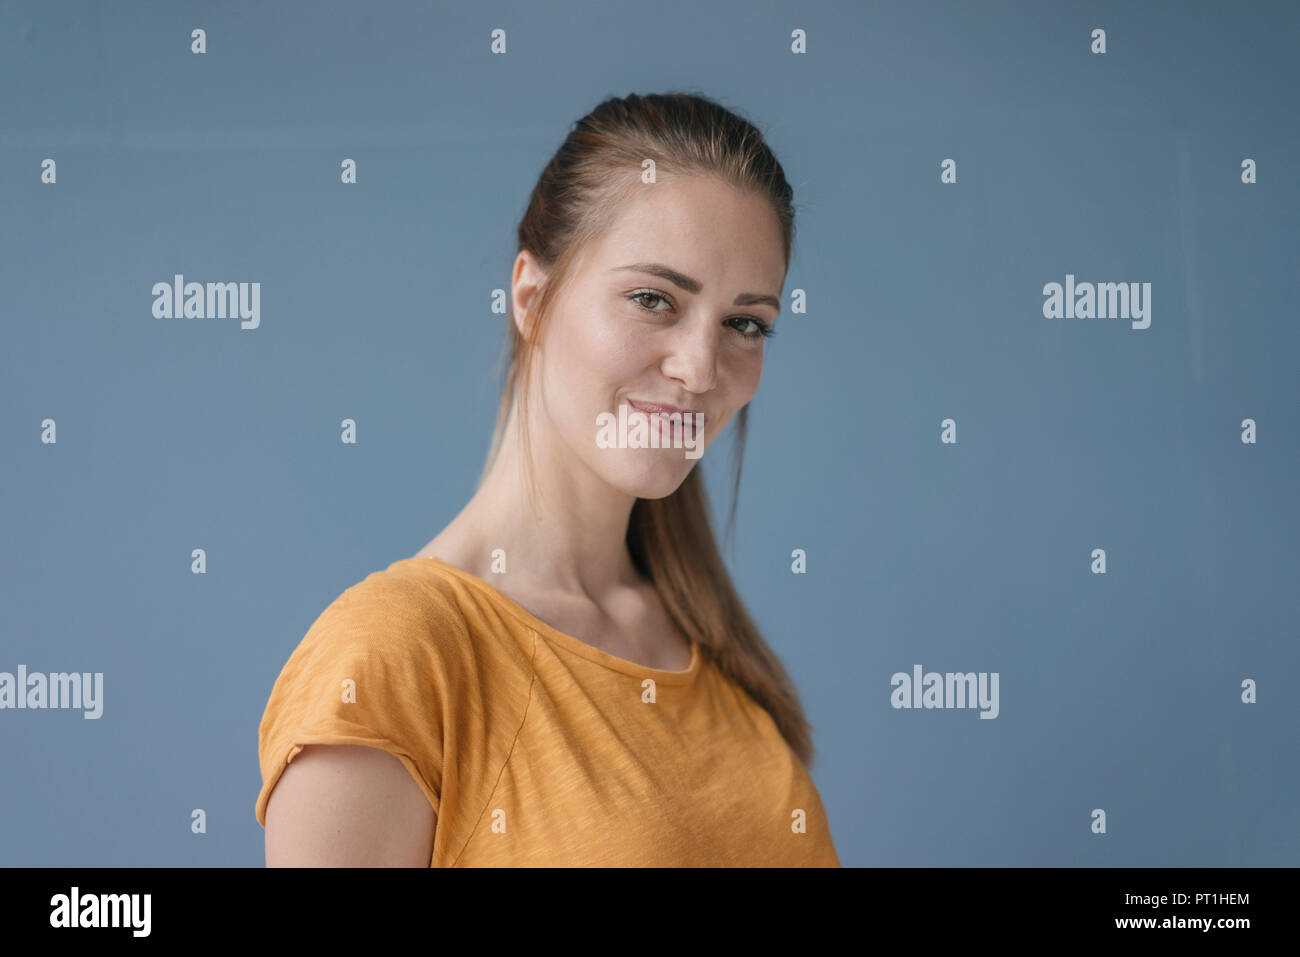 Portrait of a pretty woman with a ponytail Stock Photo